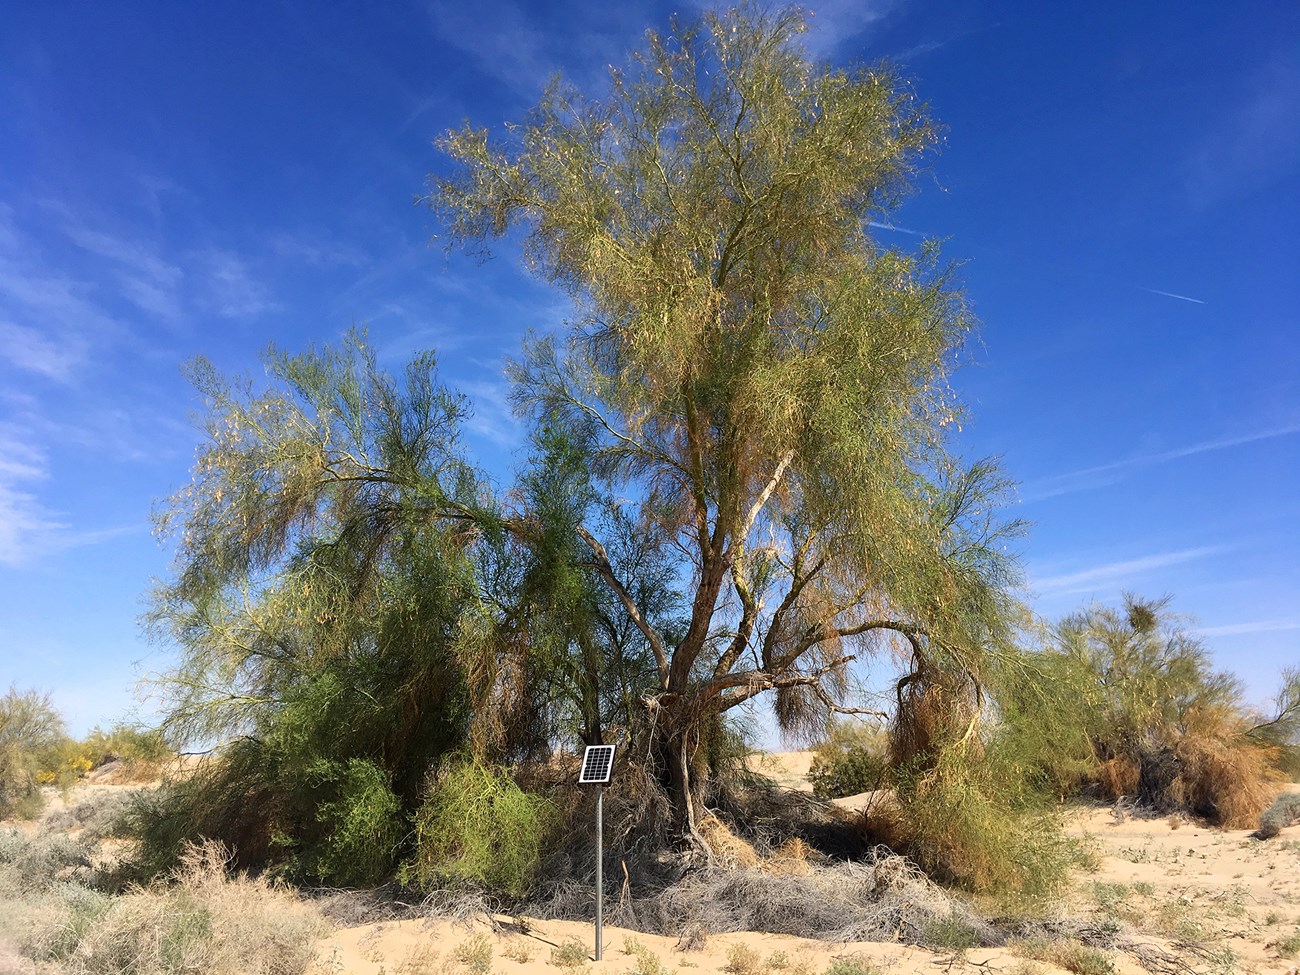 Audio detector in the California desert stands in sand in front of a tree against a blue sky.